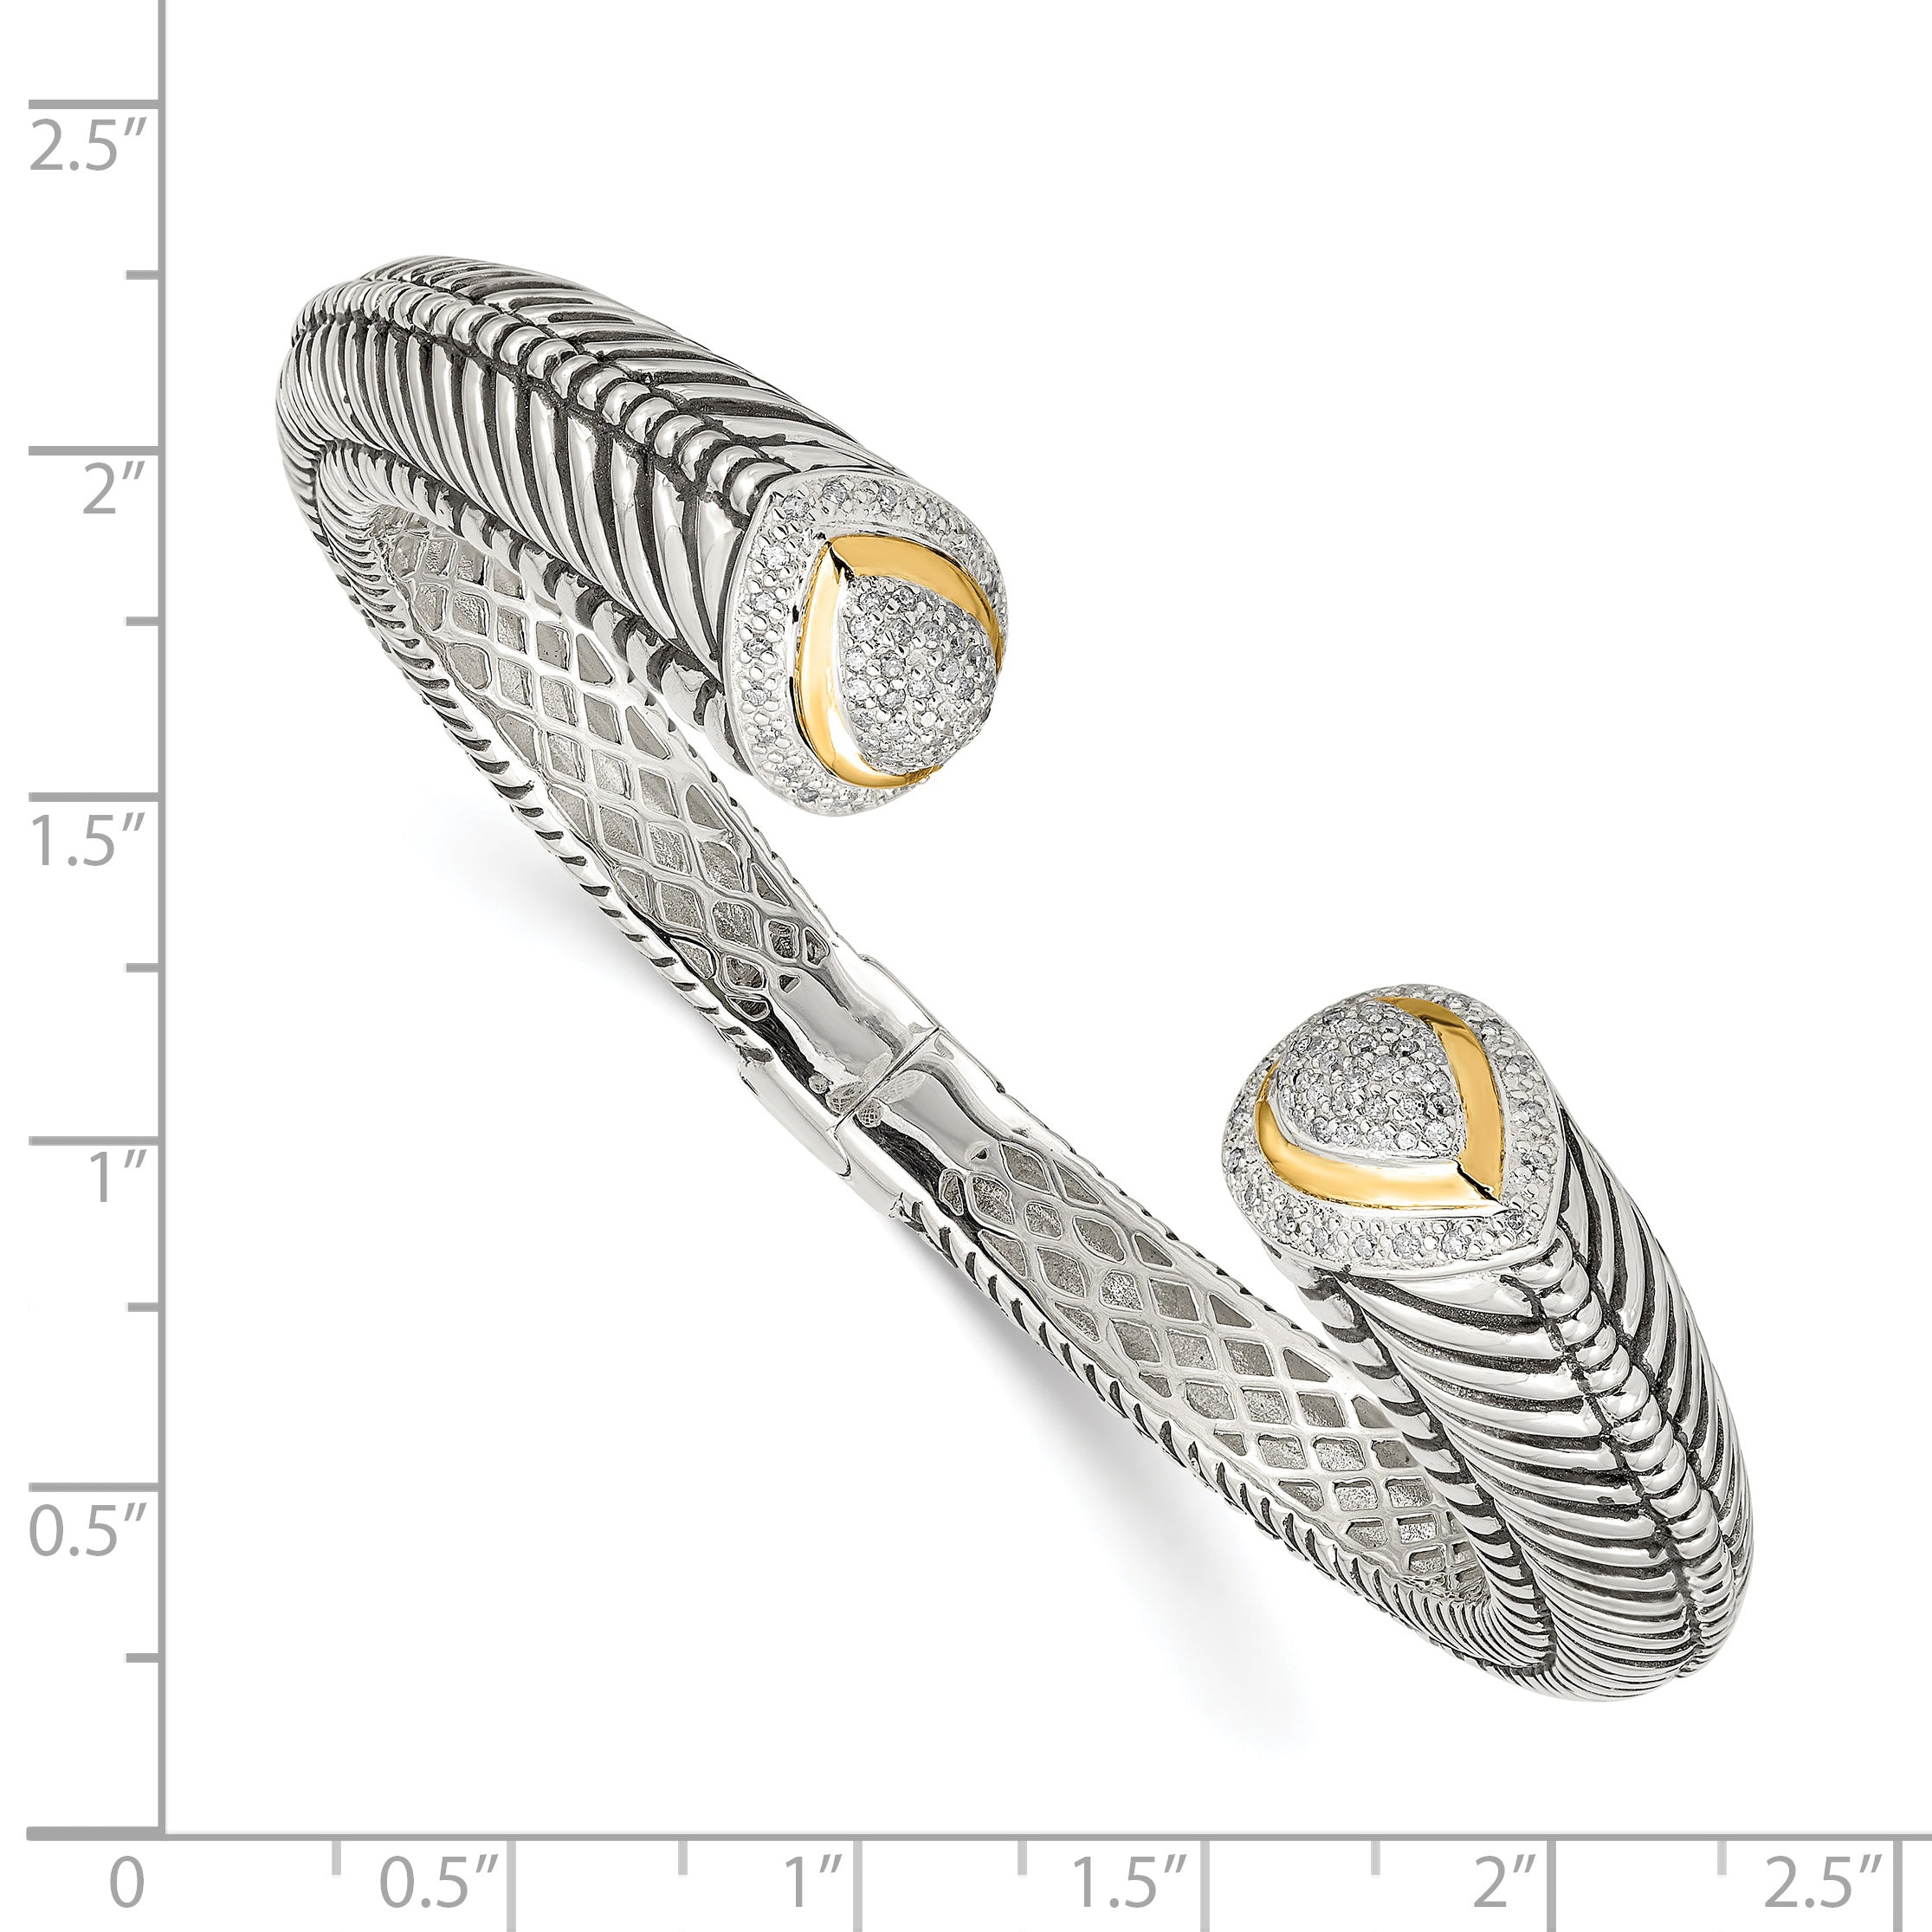 Shey Couture Sterling Silver with 14K Accent Antiqued 1/2 carat Diamond Hinged Cuff Bracelet